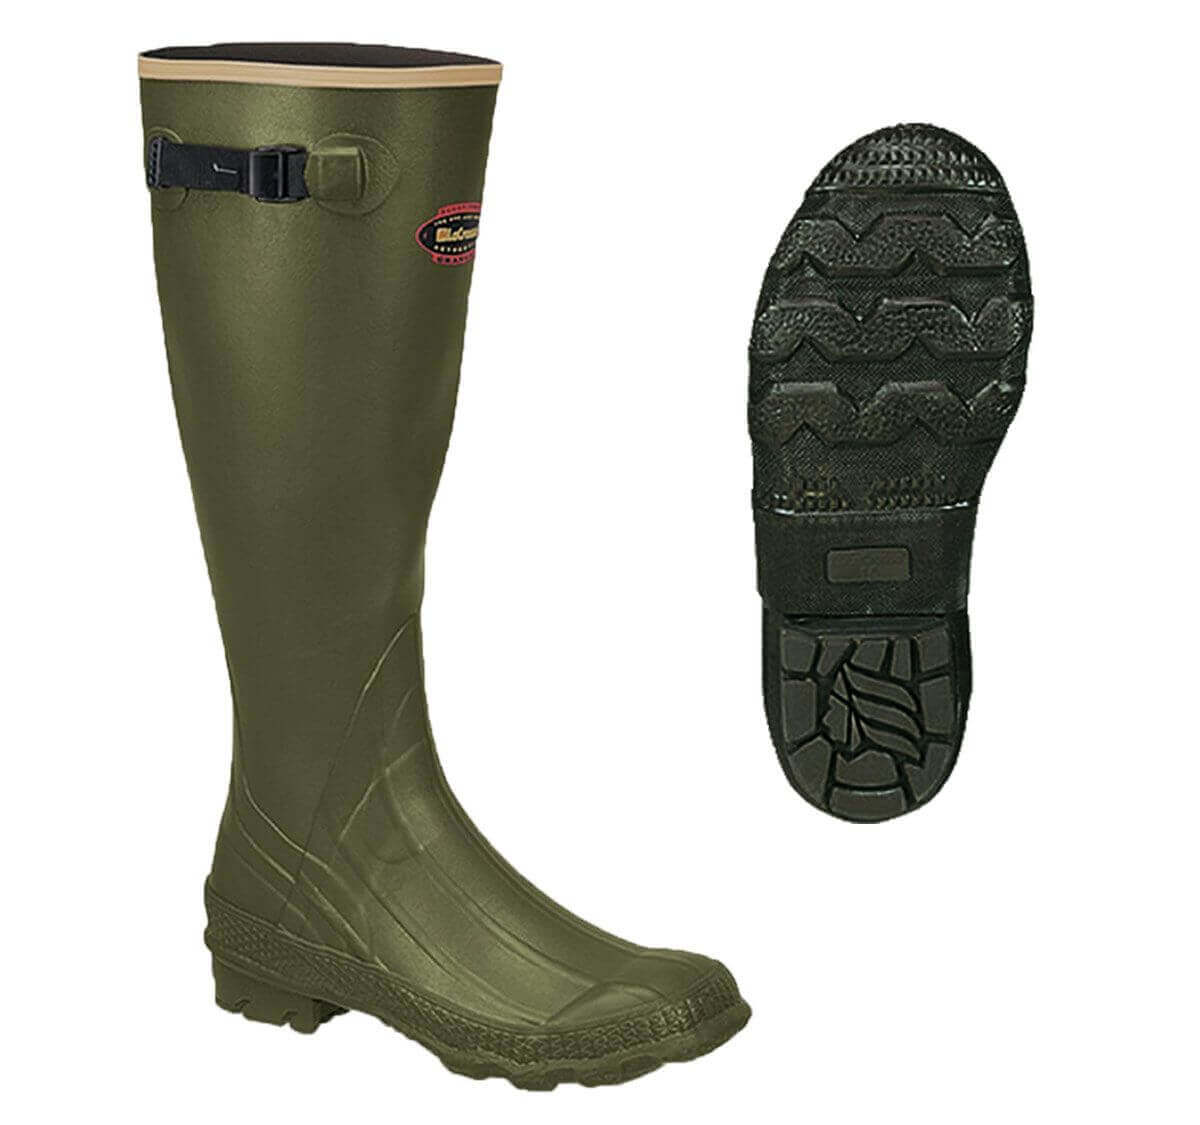 BRIARPROOF SNAKE PROTECTOR FROGLEGS WITH LACROSSE GRANGE BOOT NON-INSULATED